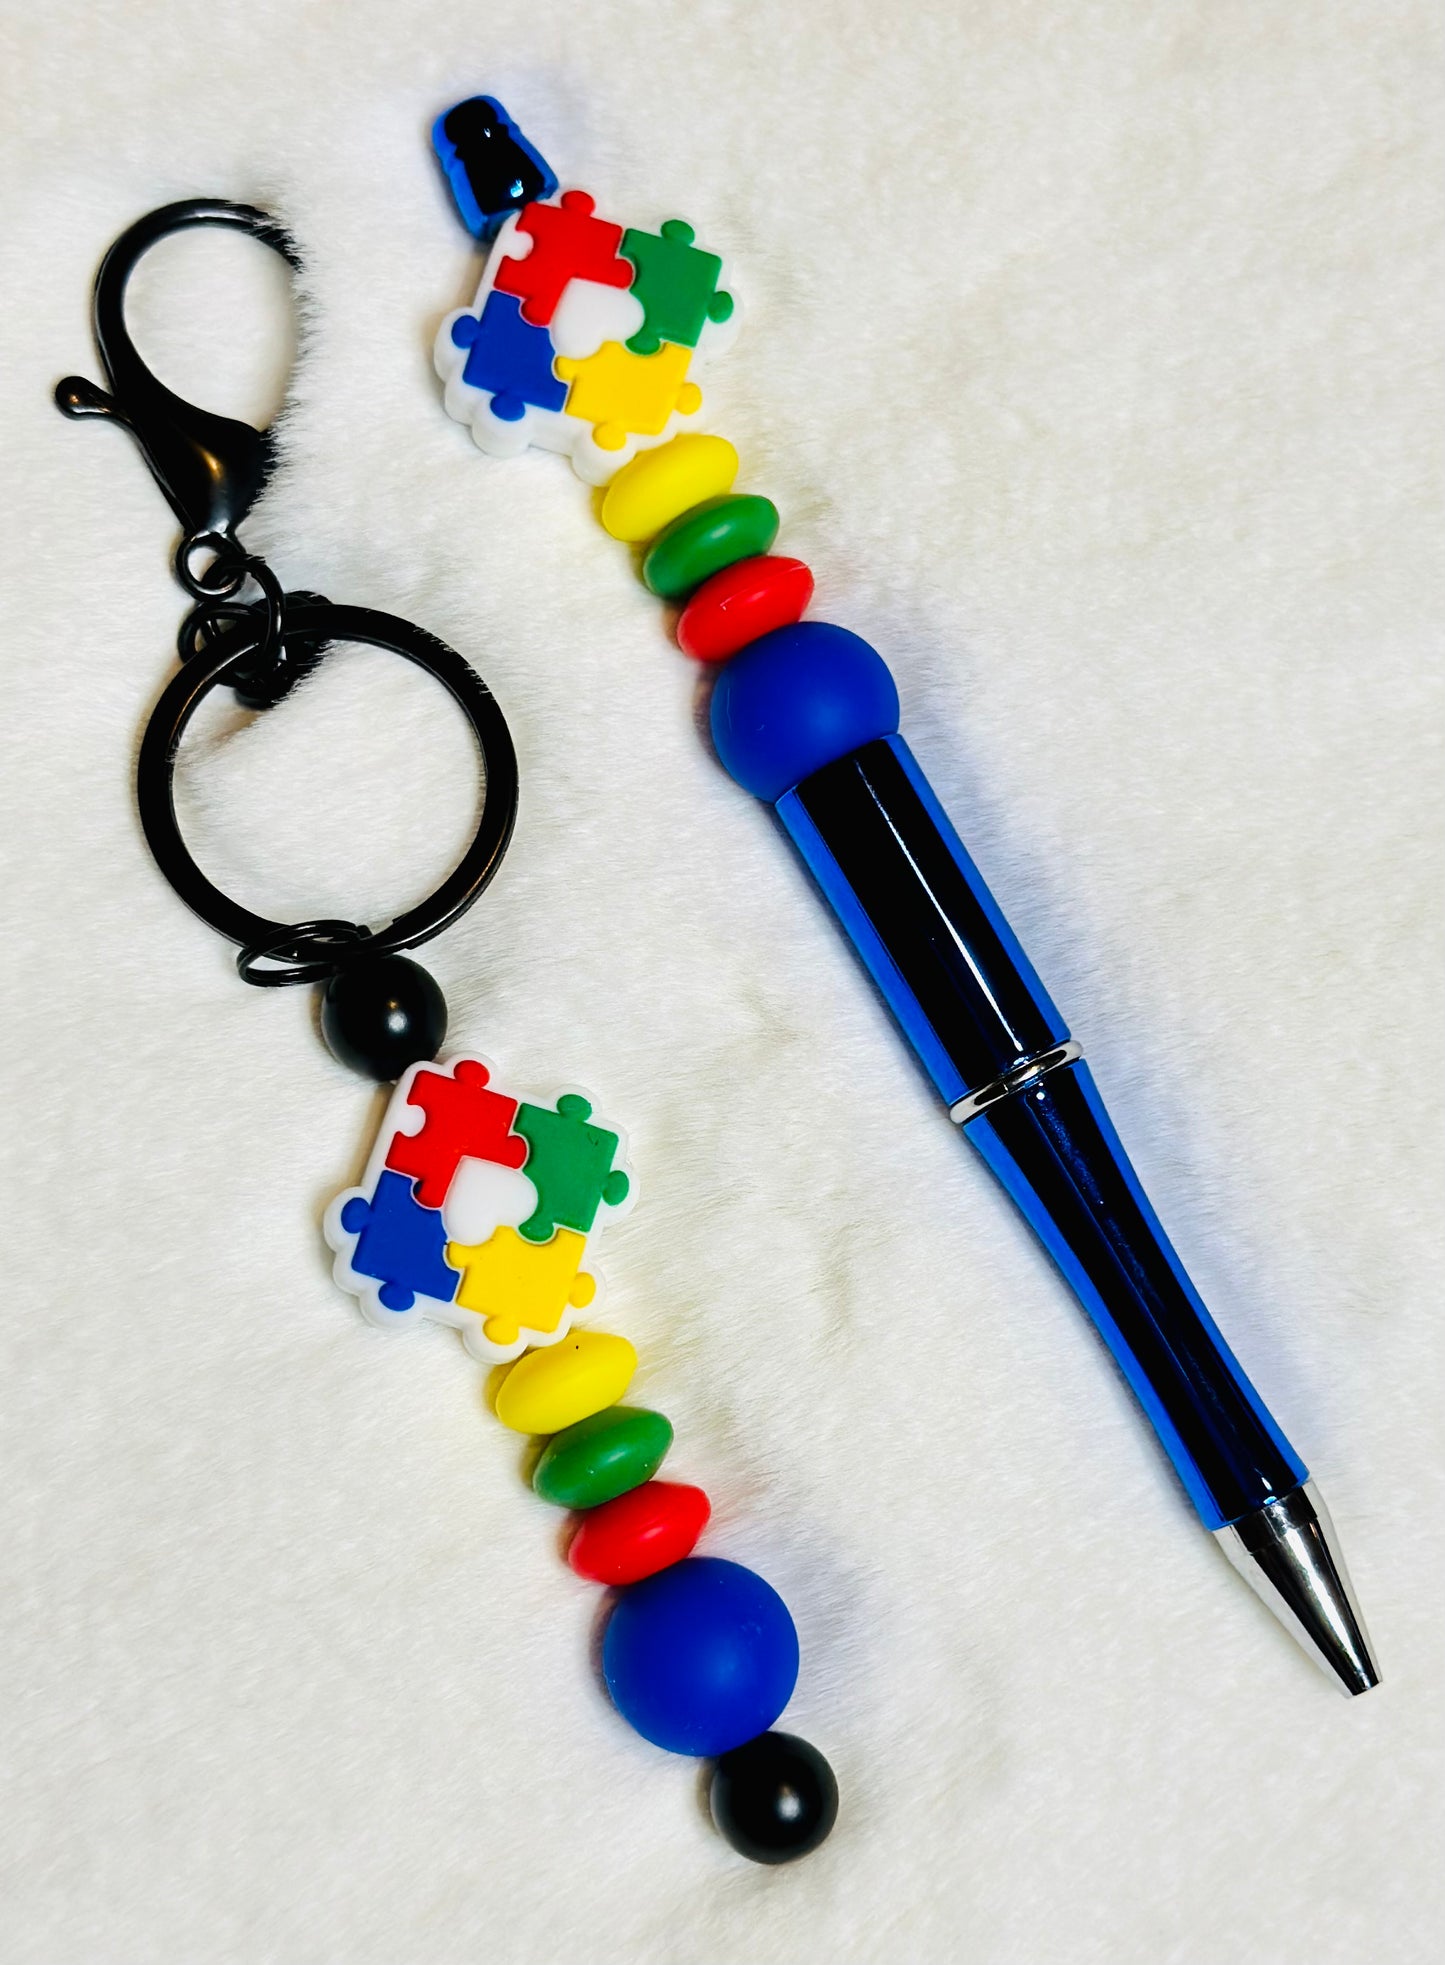 Pen and Keychain sets